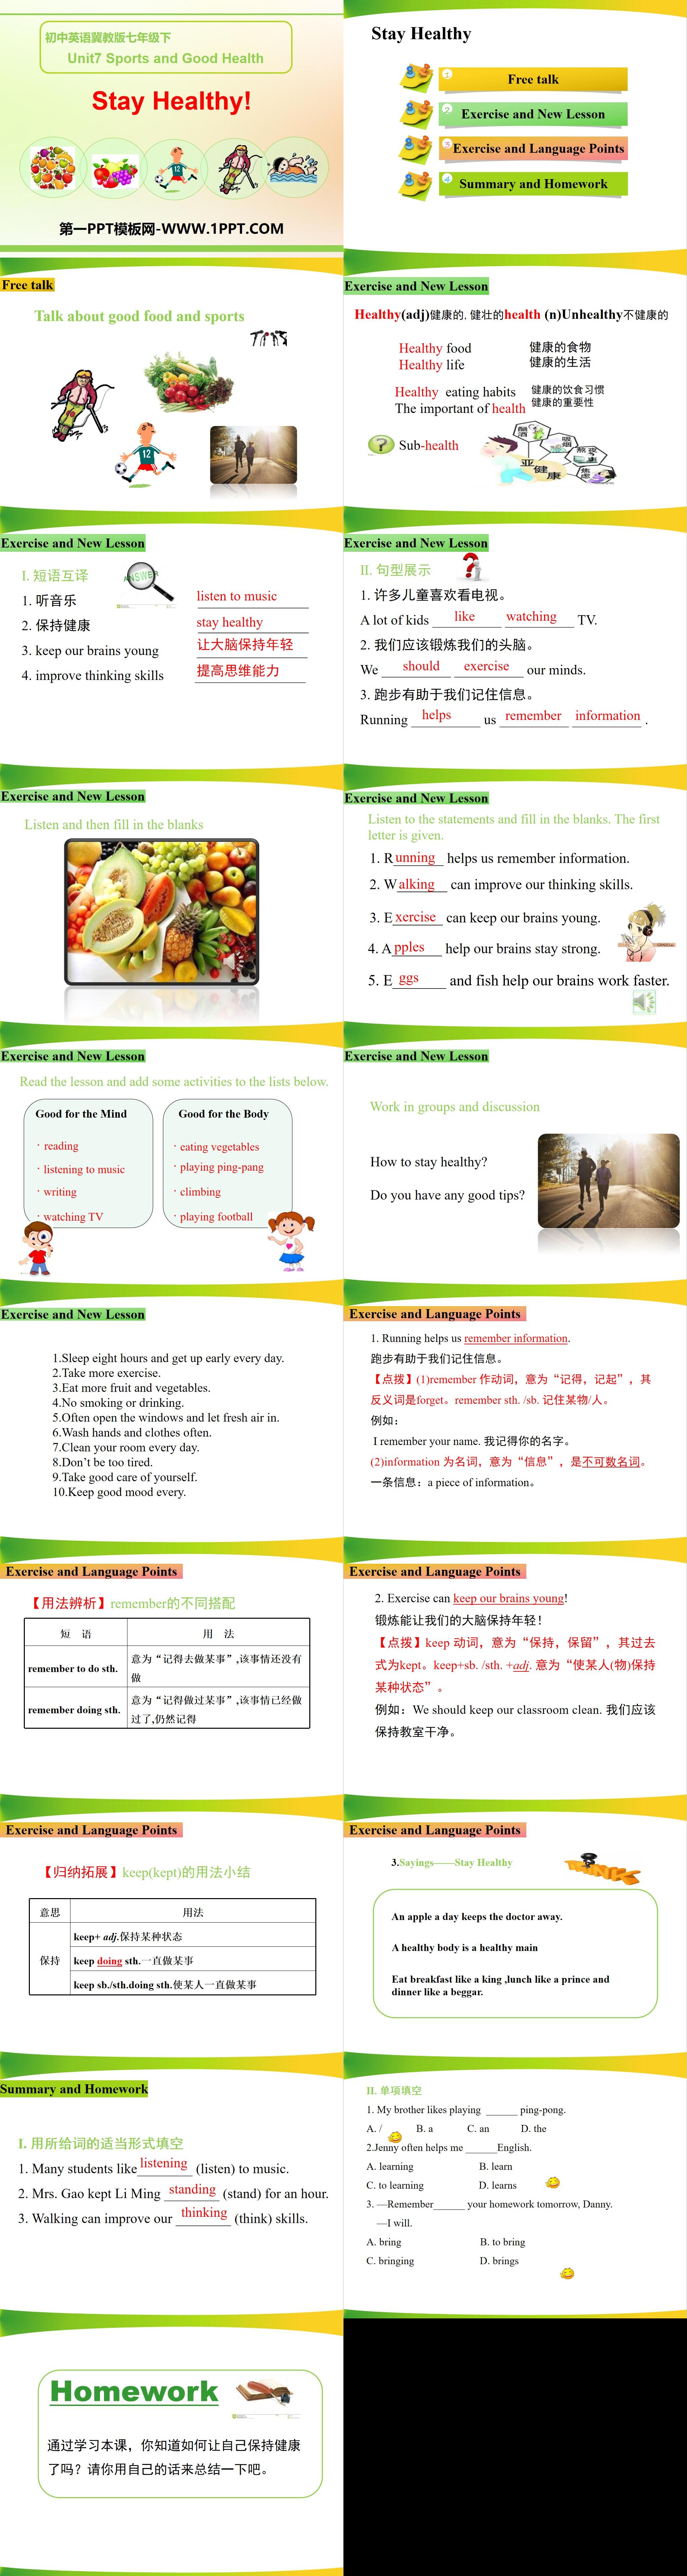 《Stay Healthy!》Sports and Good Health PPT
（2）